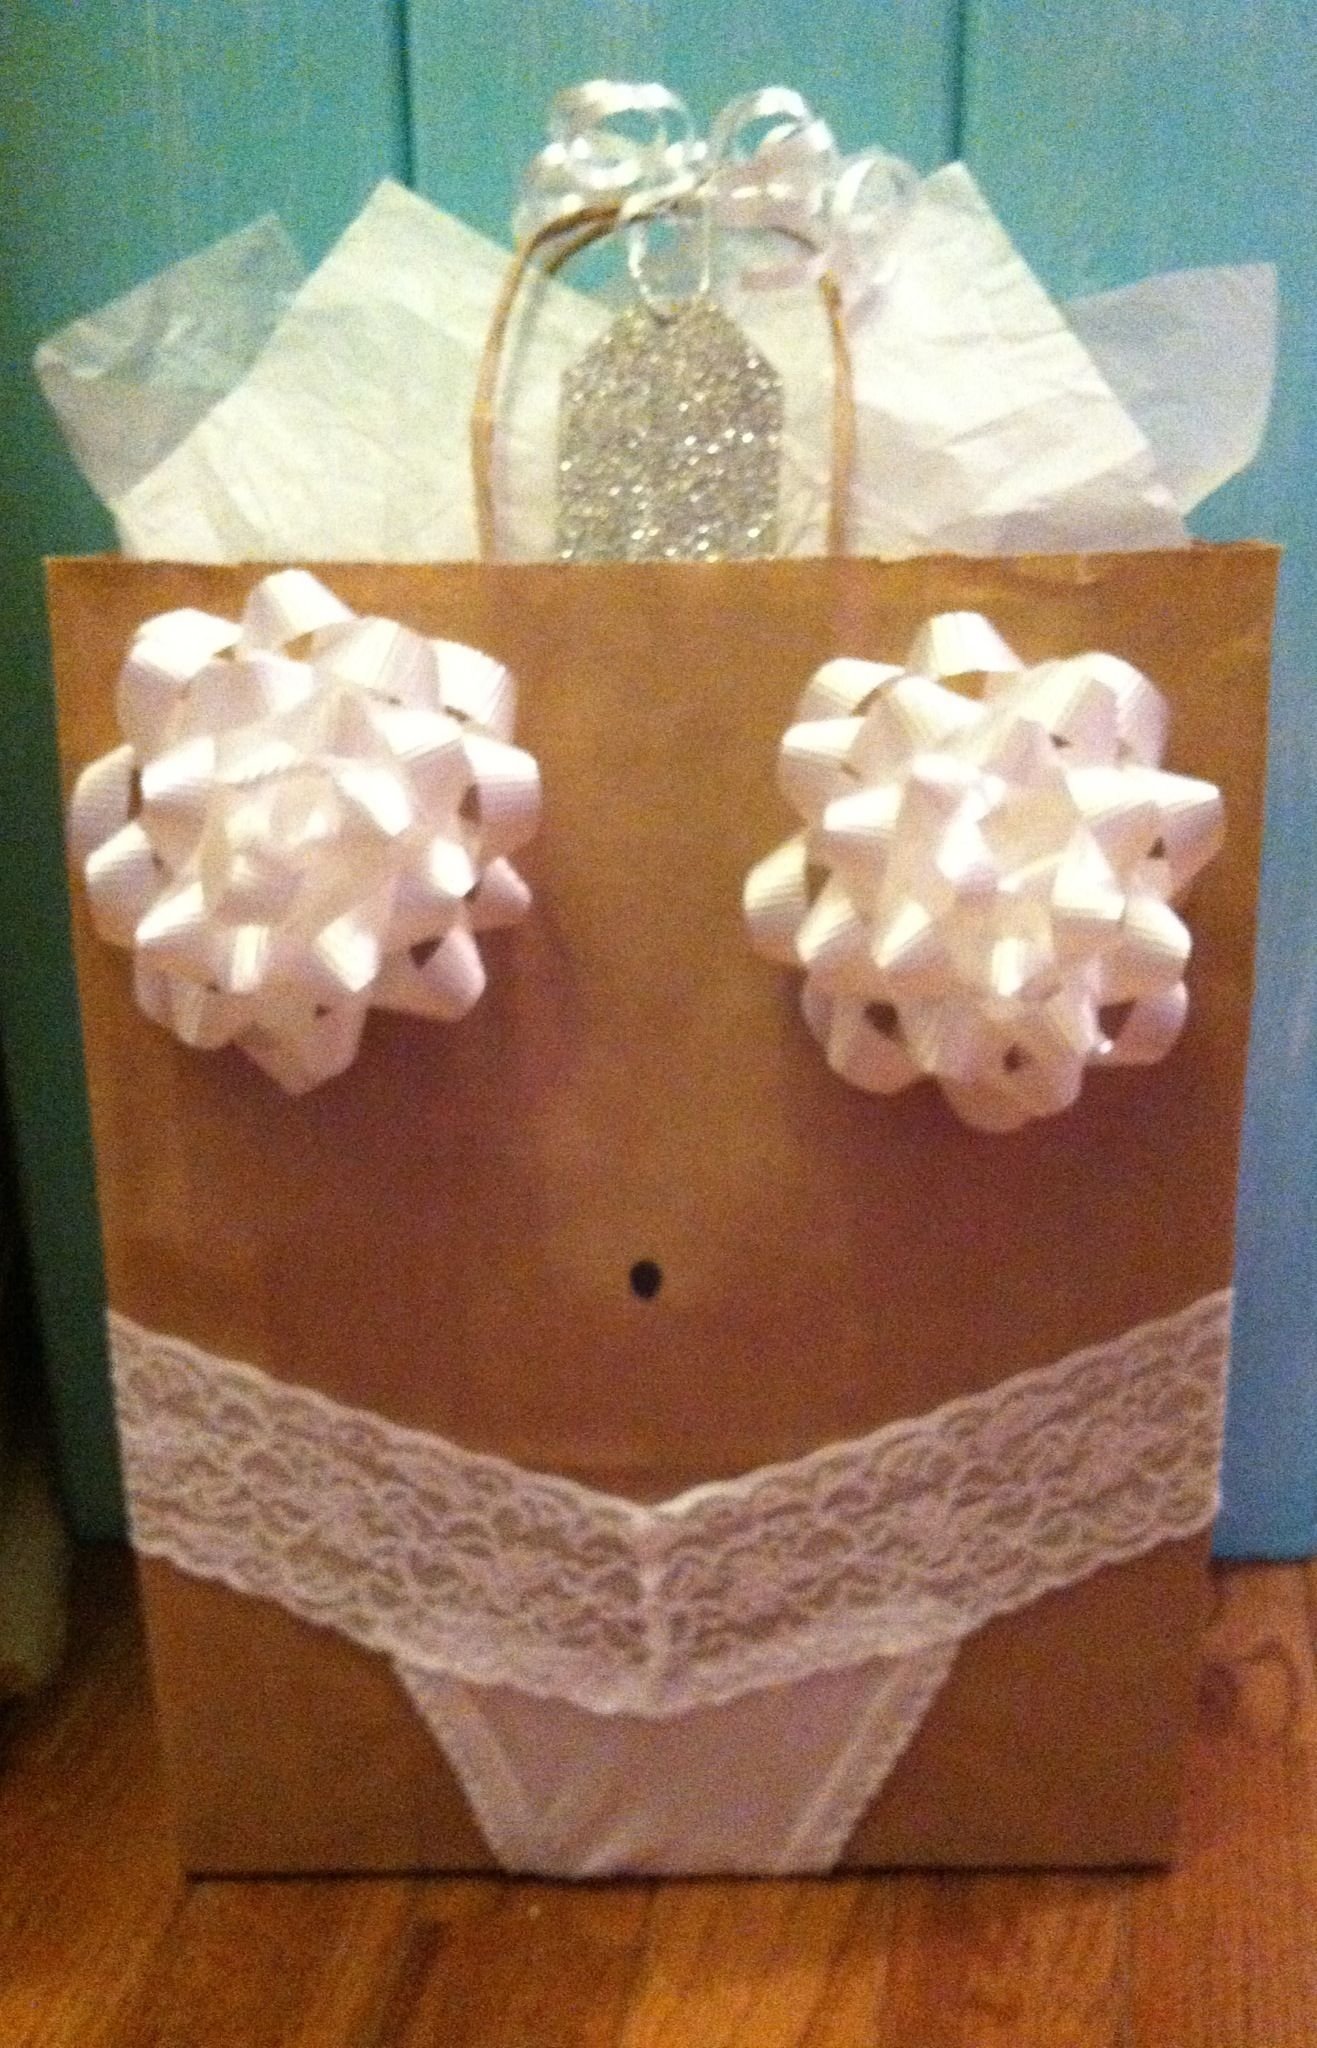 10 Unique Bride To Be Gift Ideas lingerie shower gift wrap idea next person to get married is 2 2022